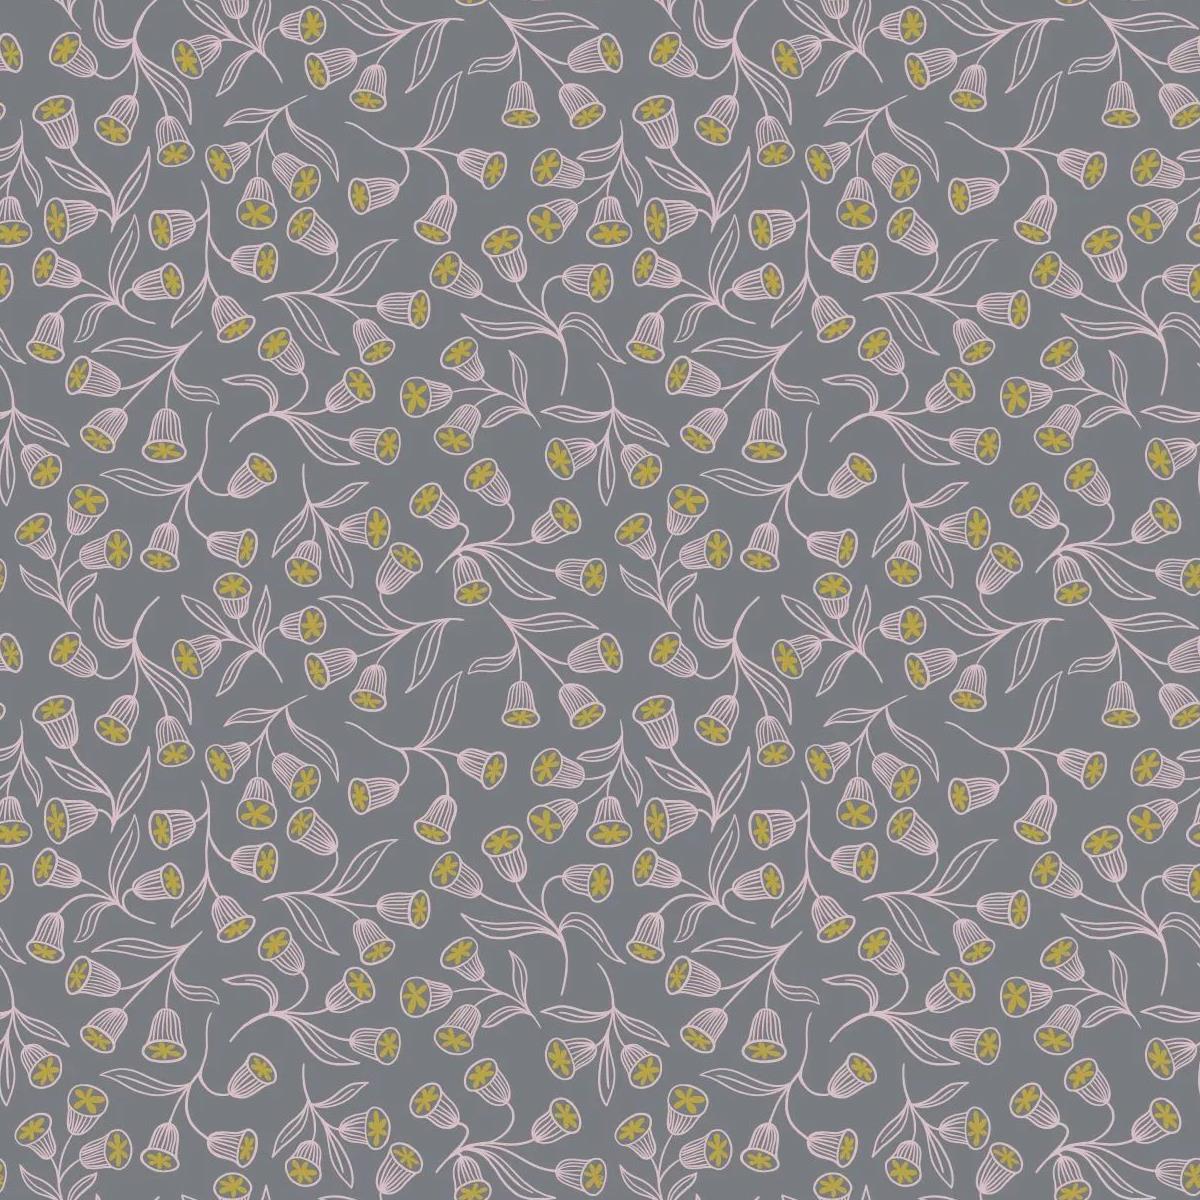 /images/product-images/2020images/FashionFabric/CraftCotton/LINov21/A544.1-Enchanted-flowers-on-grey-with-gold-metallic.jpg